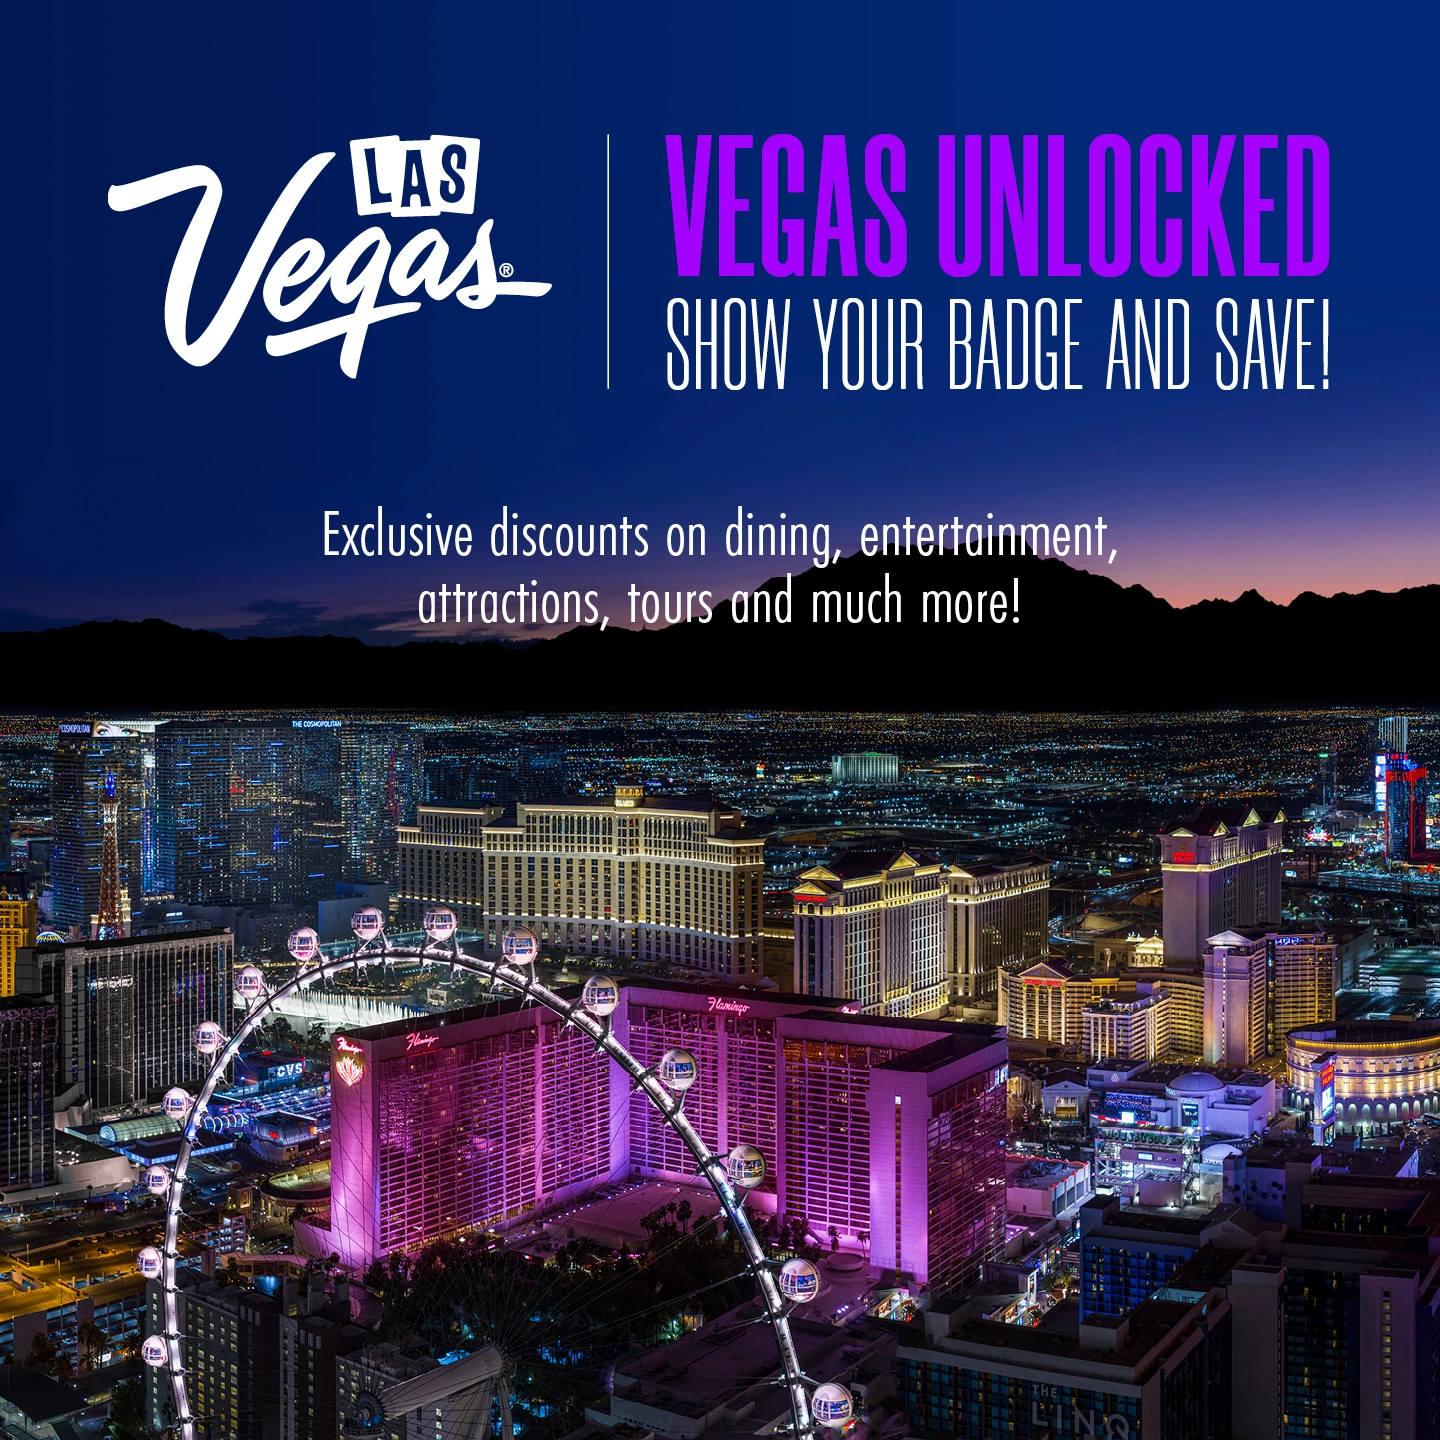 Ariel view of Las Vegas with text "Vegas Unlocked," by Vegas Means Business, the Las Vegas Convention and Visitors Authority "Show Your Badge and Save" promotion